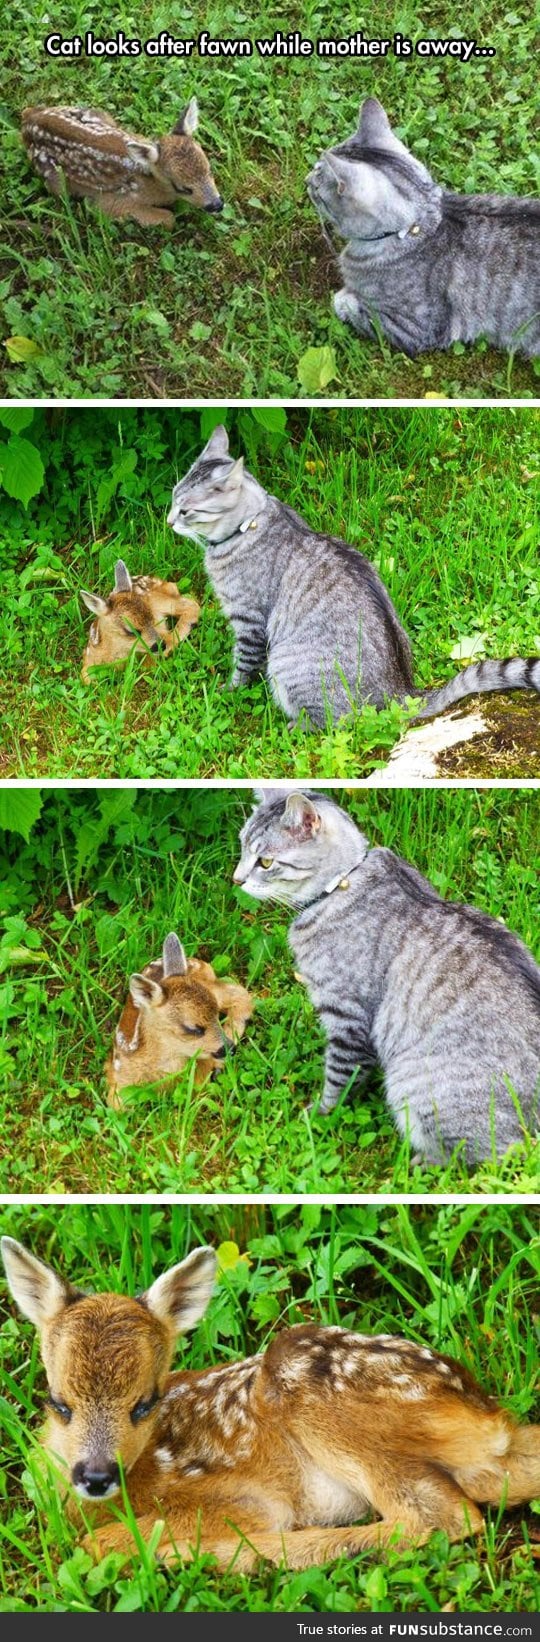 Cat takes care of fawn